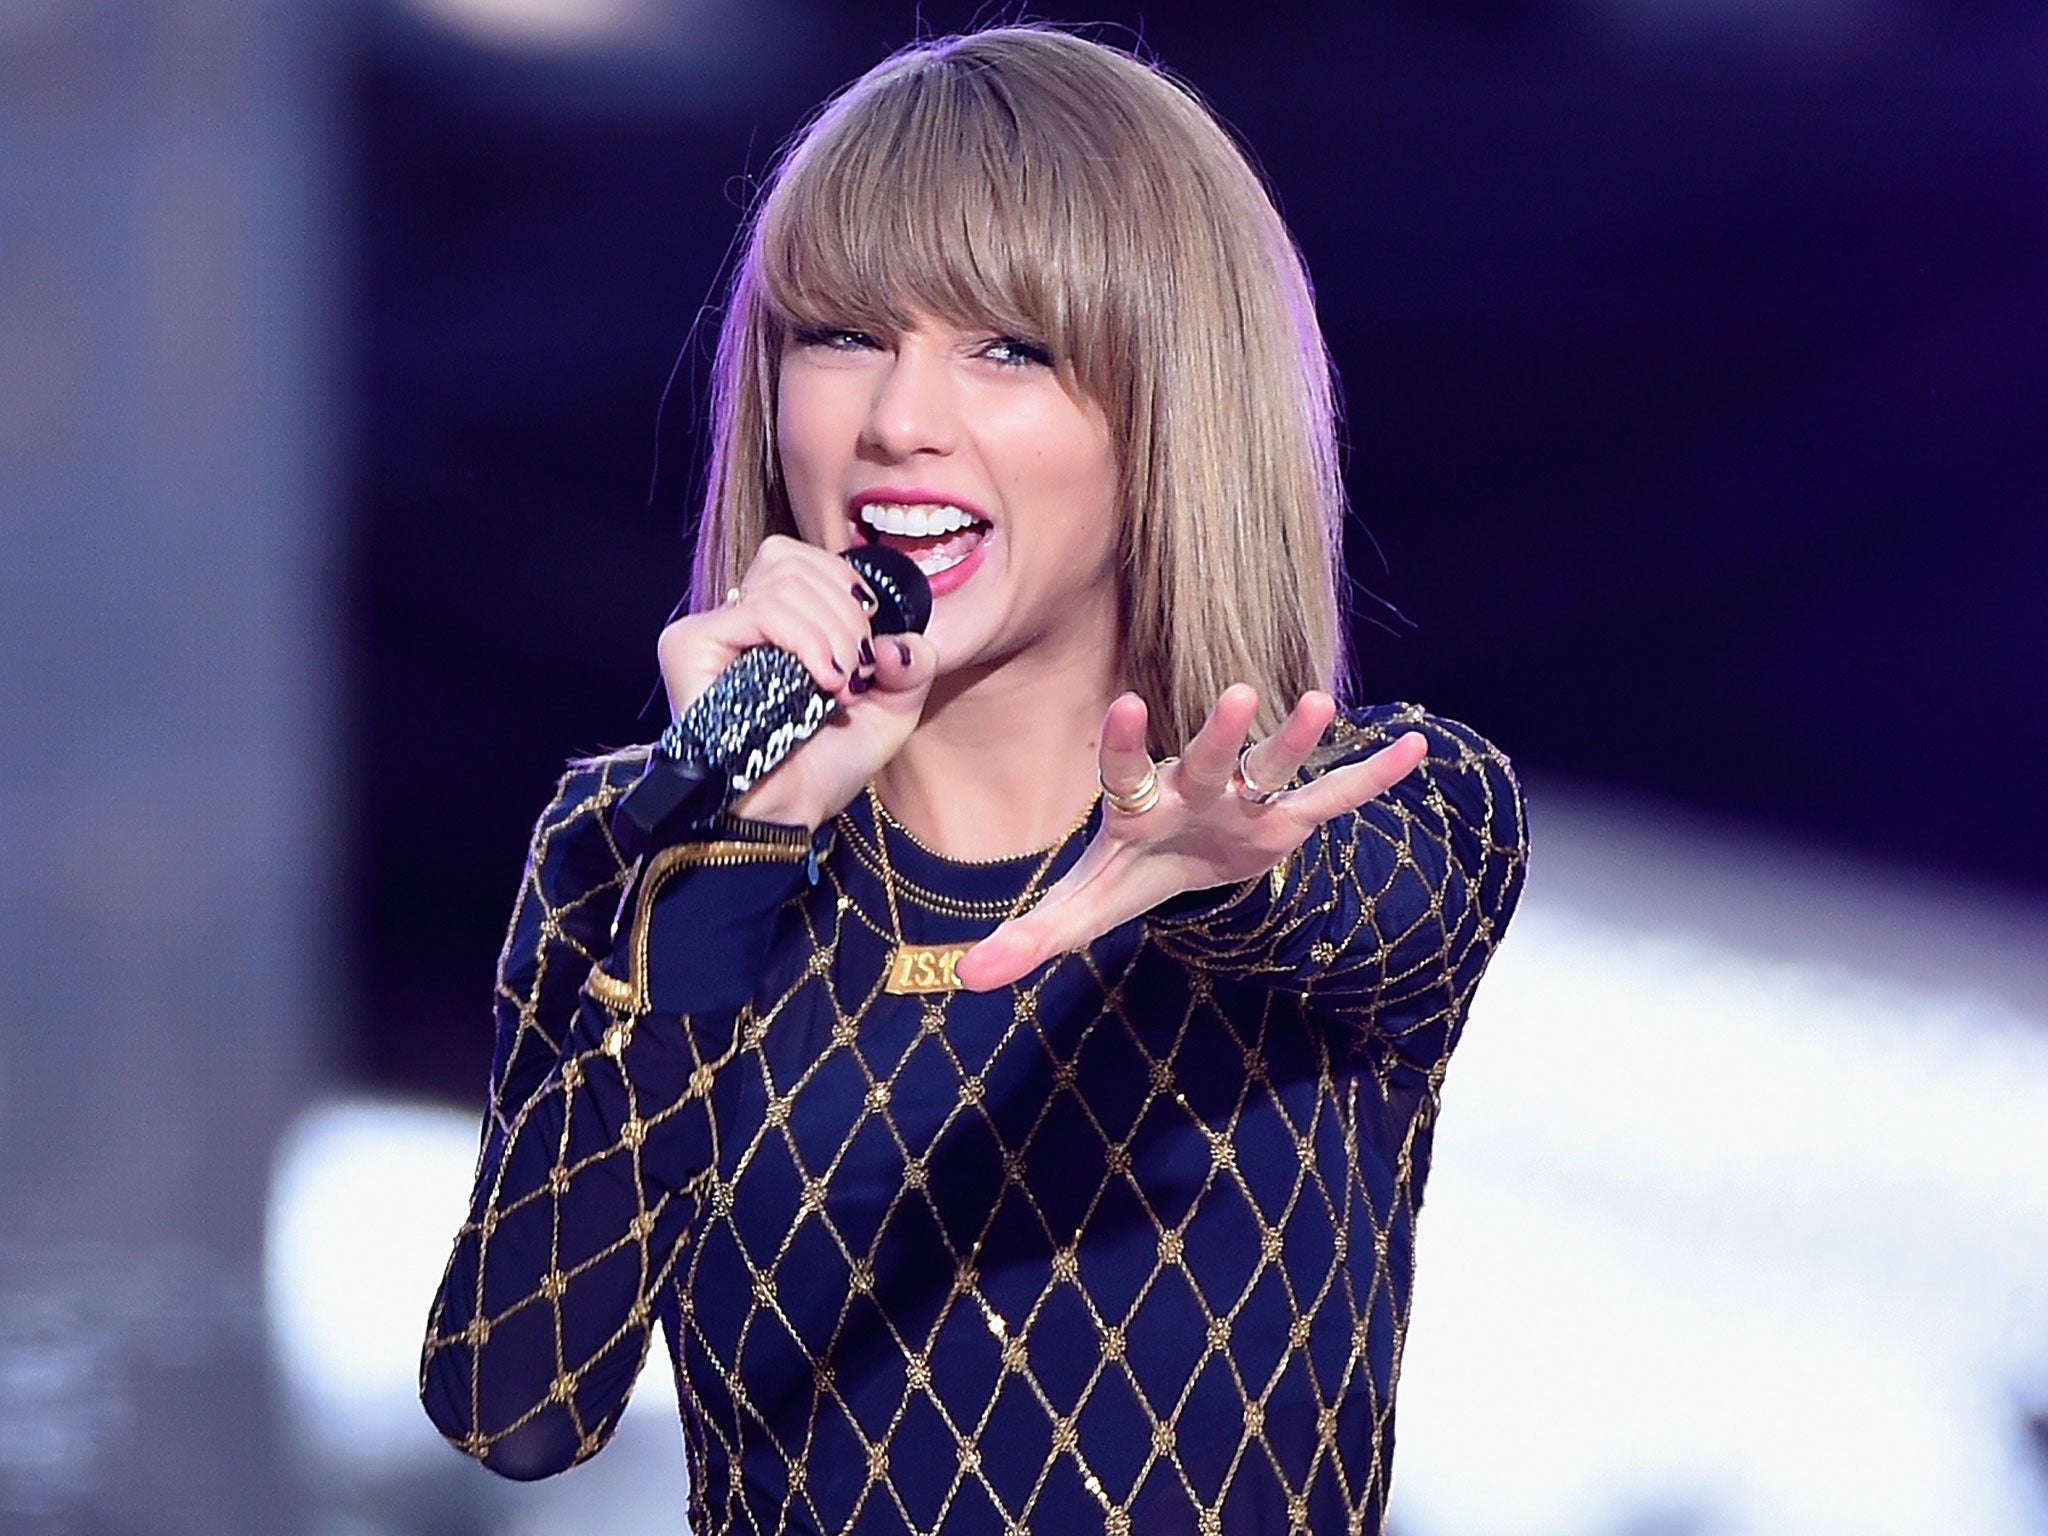 Taylor Swift seems to have left her country roots behind her to pursue a poppier sound